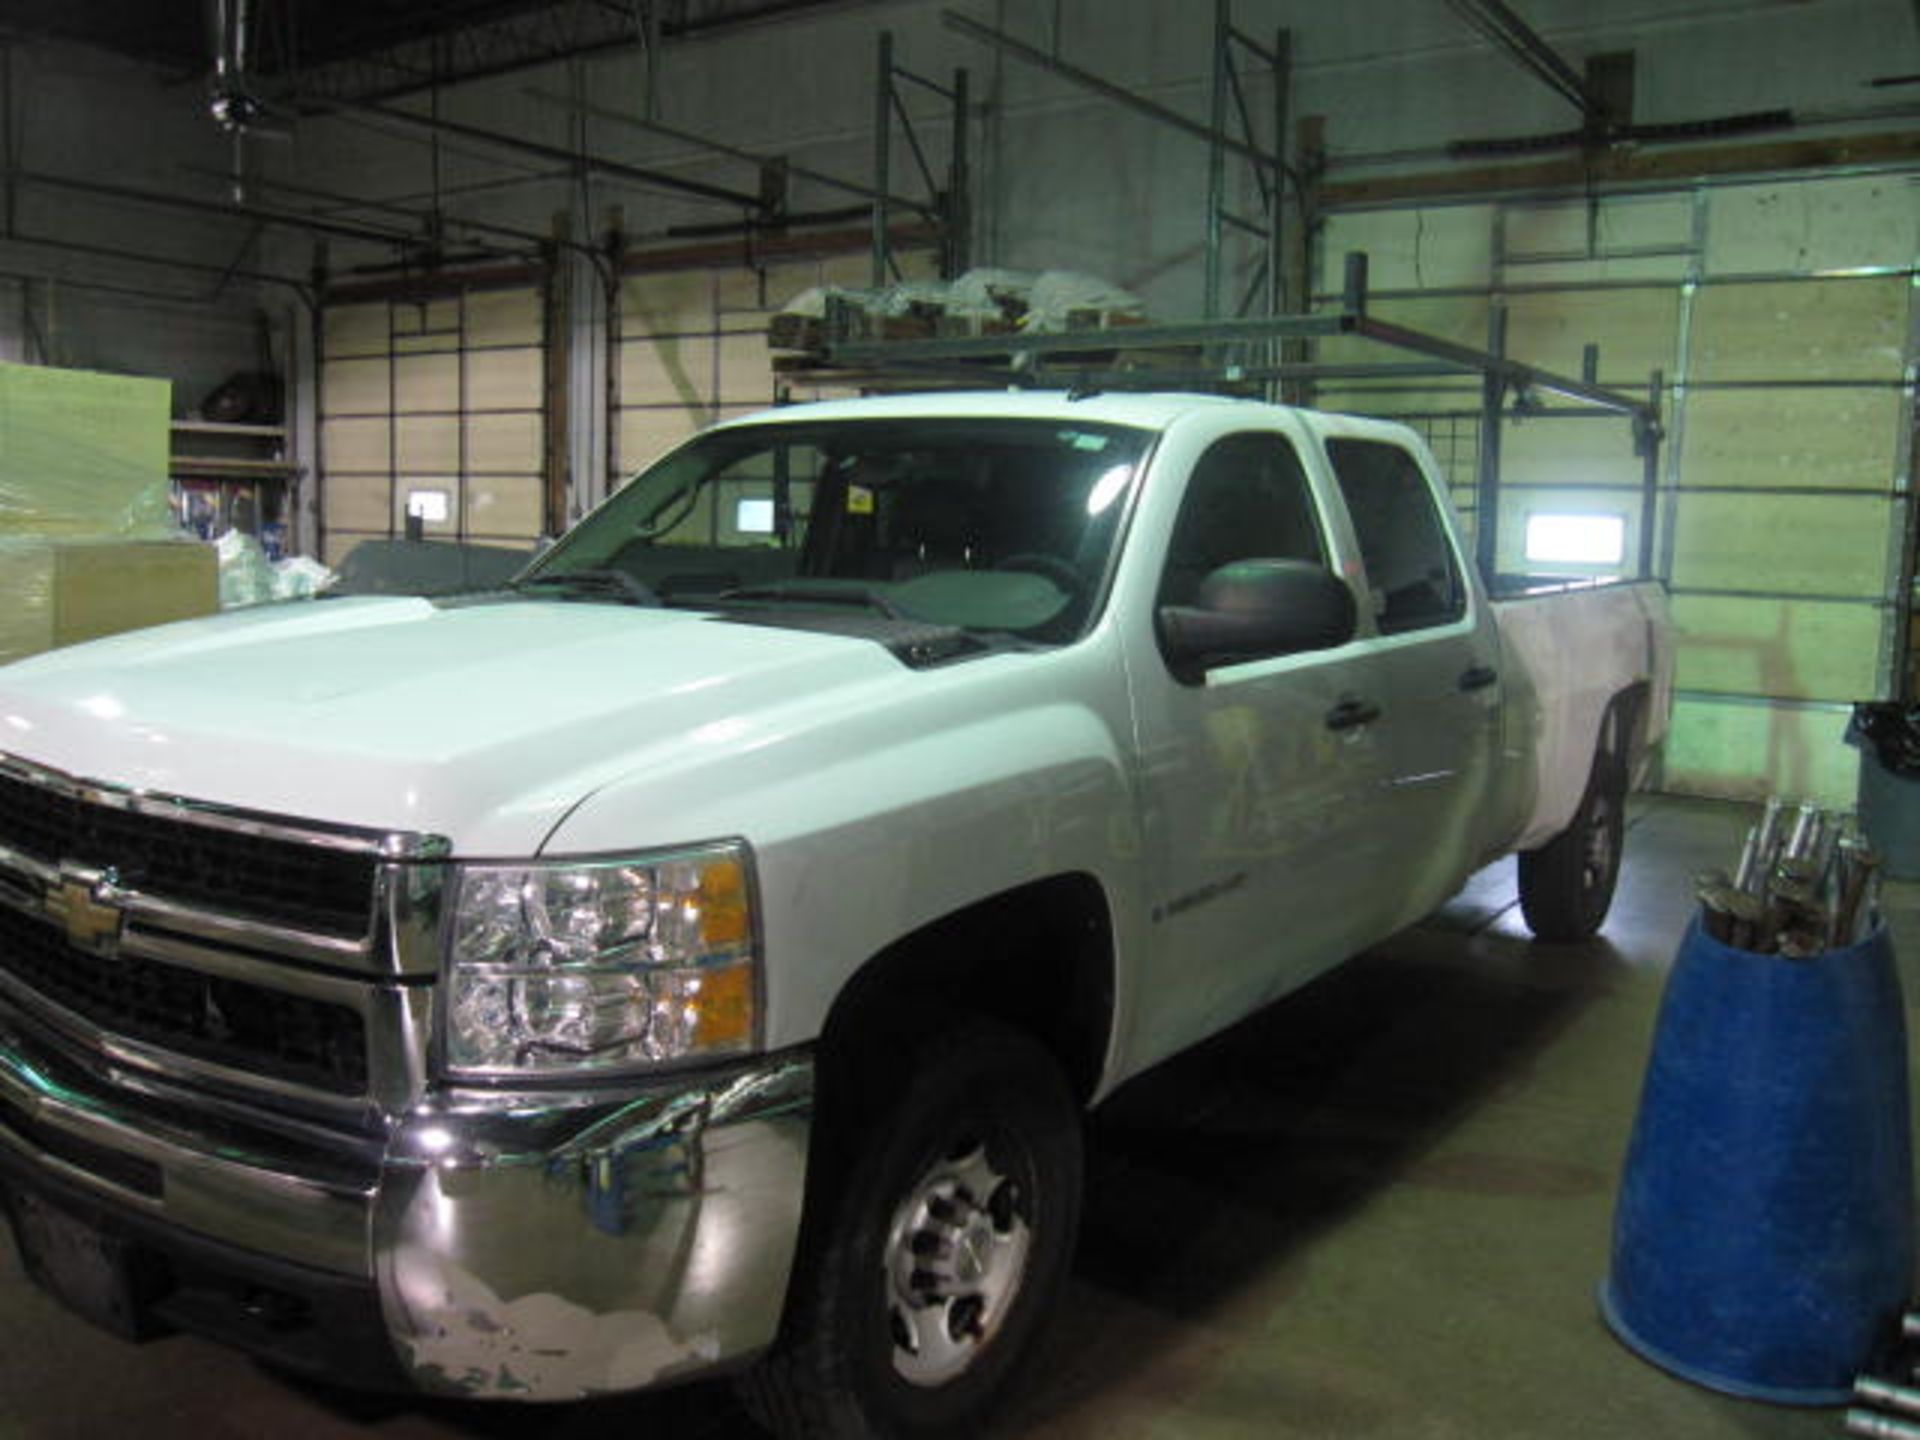 2007 Chevrolet Crew Cab Pick-up Truck, with Rack & Lift Gate, 2500 HD, VIN 1GCHC23K27F524910, 127,32 - Image 2 of 10